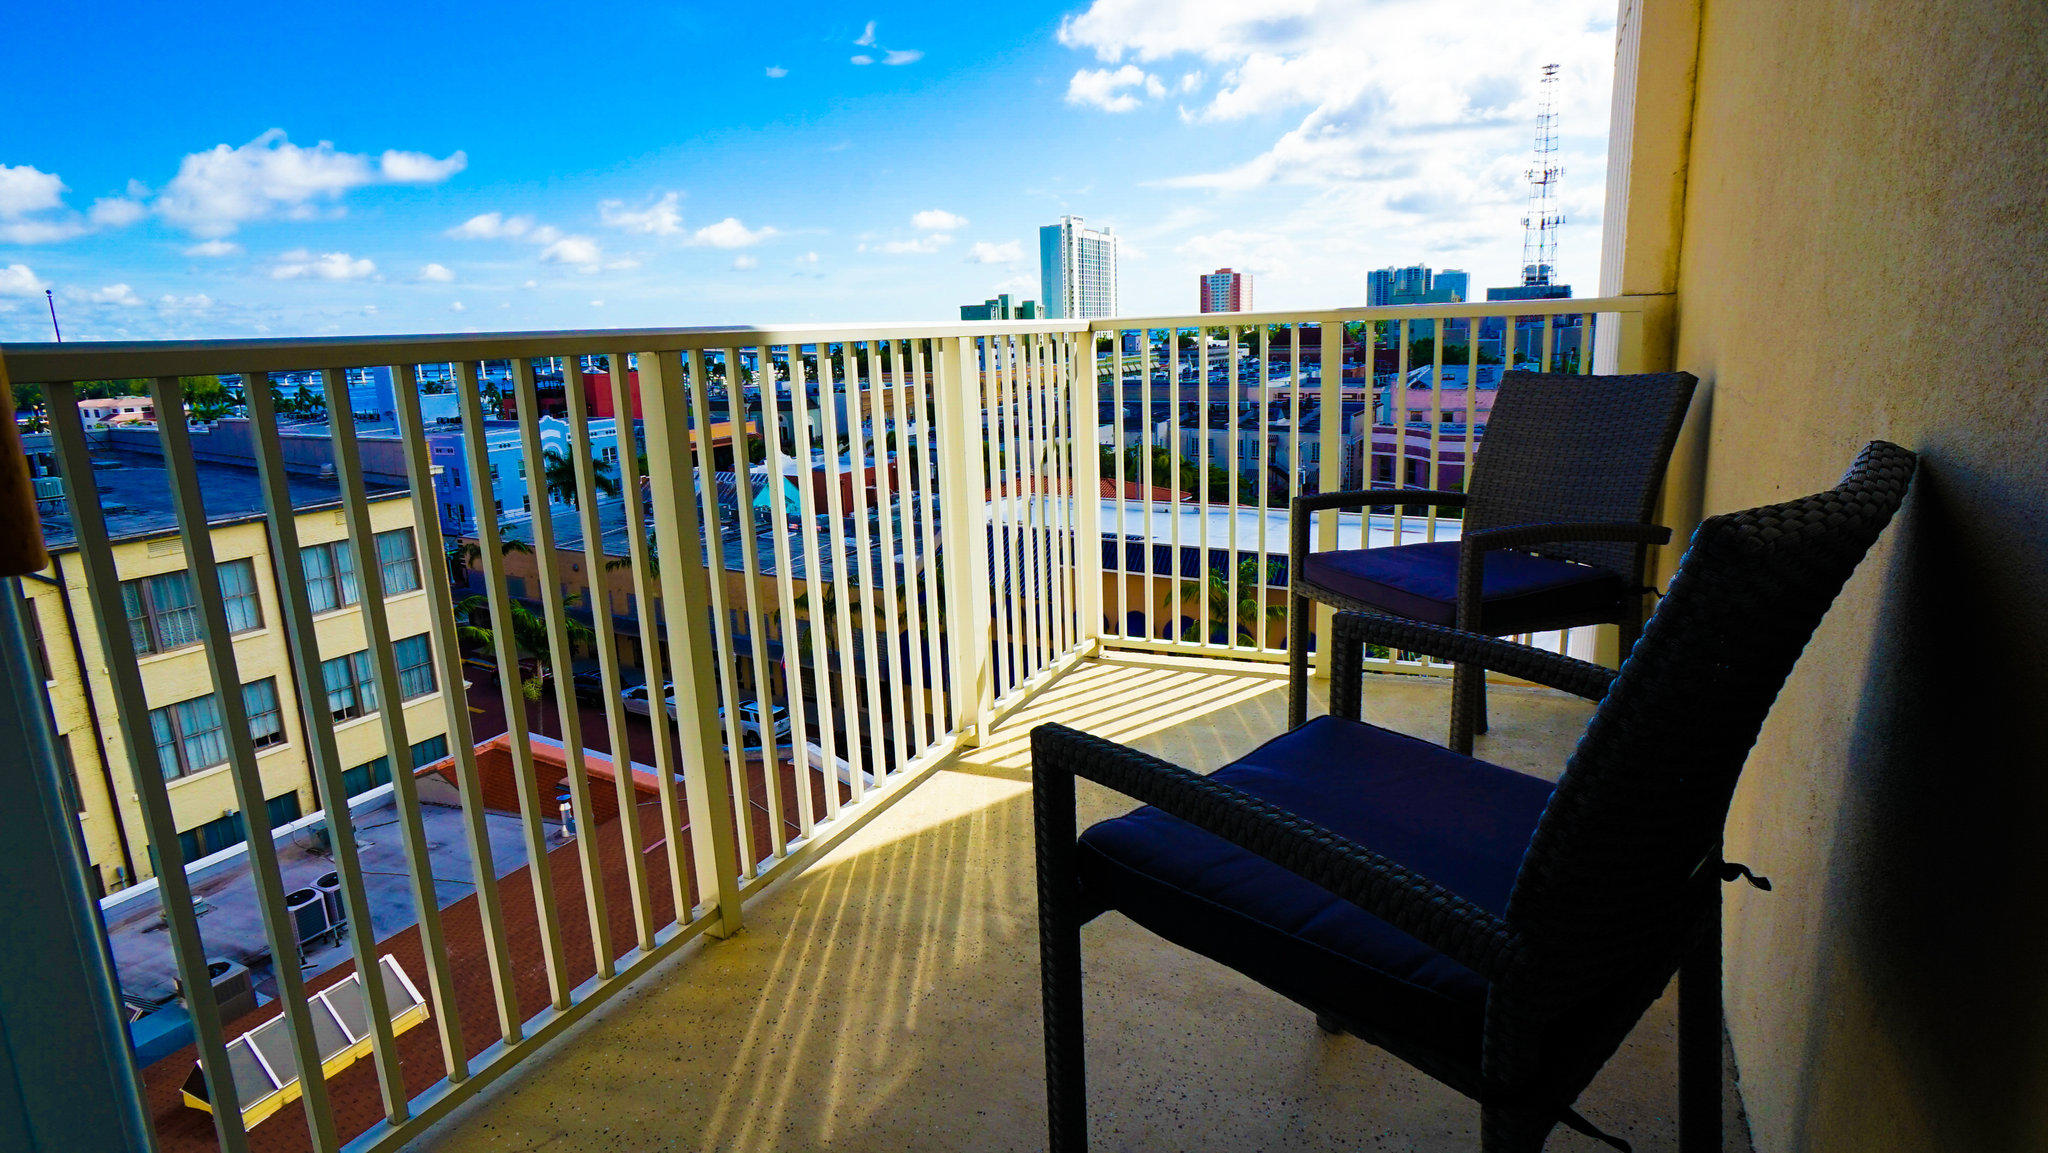 Hotel Indigo Ft Myers Dtwn River District Photo